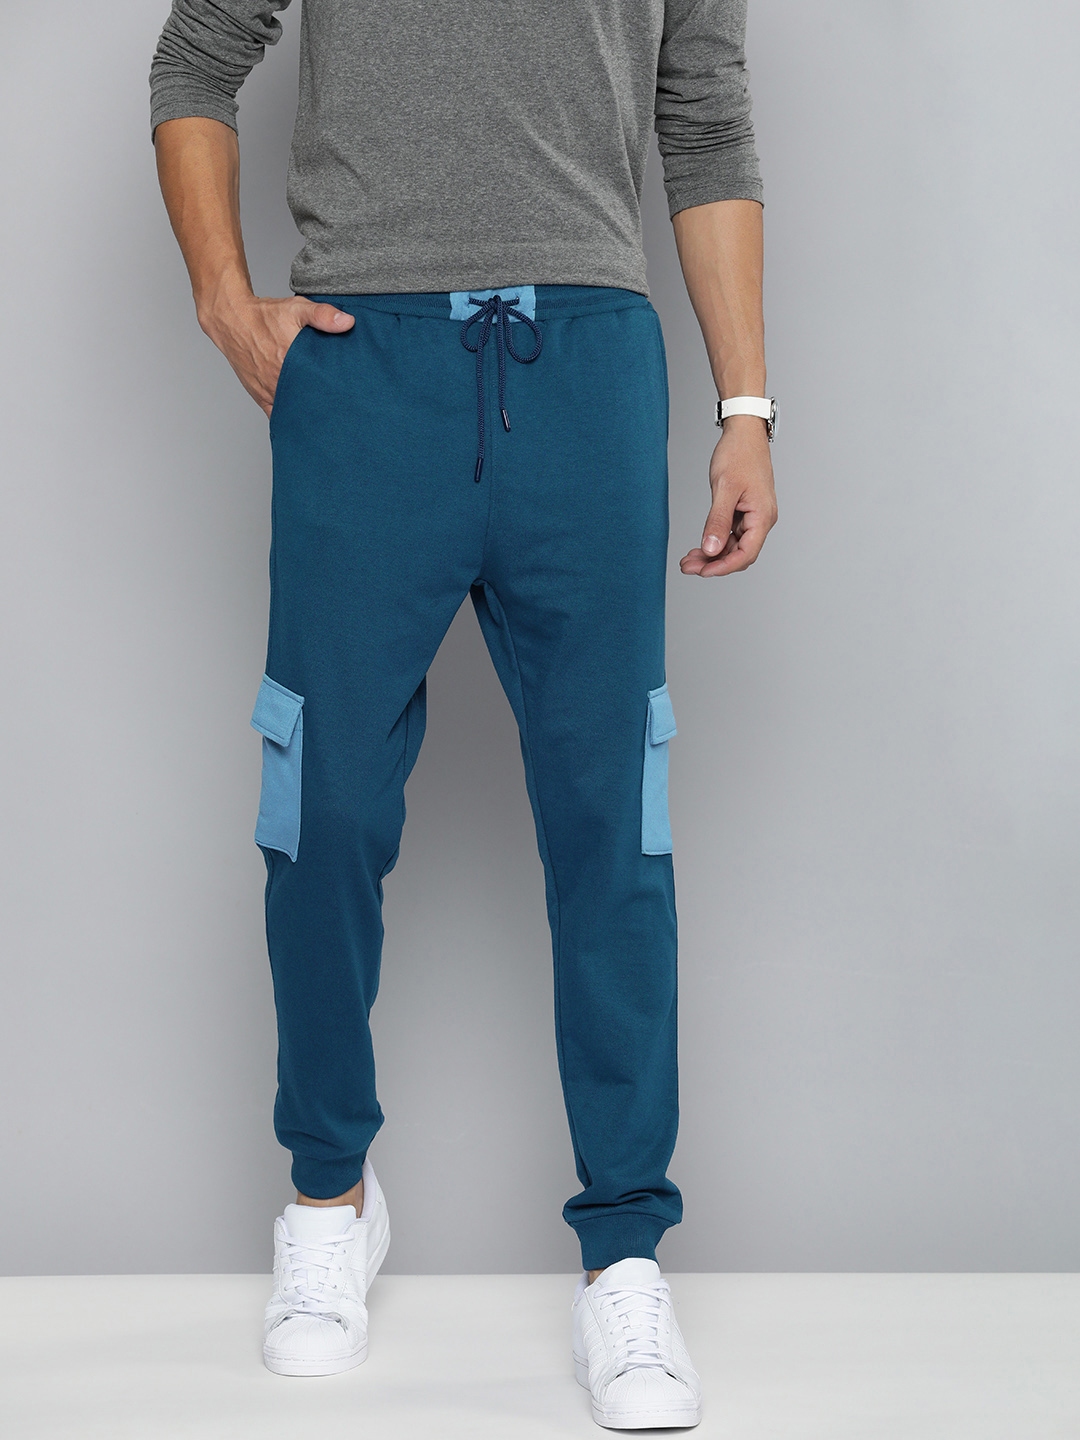 Buy Cotton Joggers Track Pants For Mens Online in India – Harbour 9